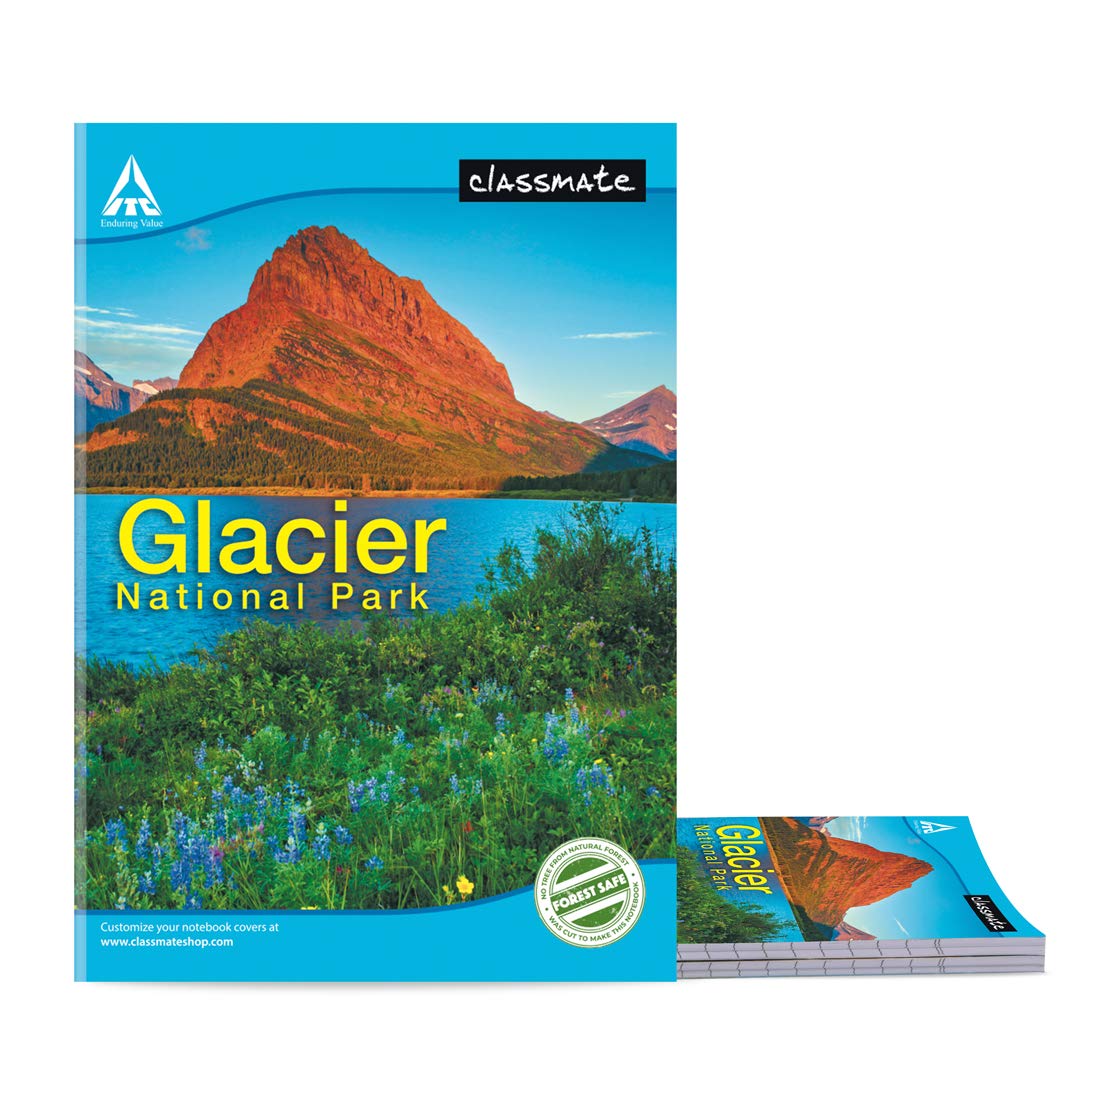 ClassMate 172 Pages Single Line Register (Pack of 6)